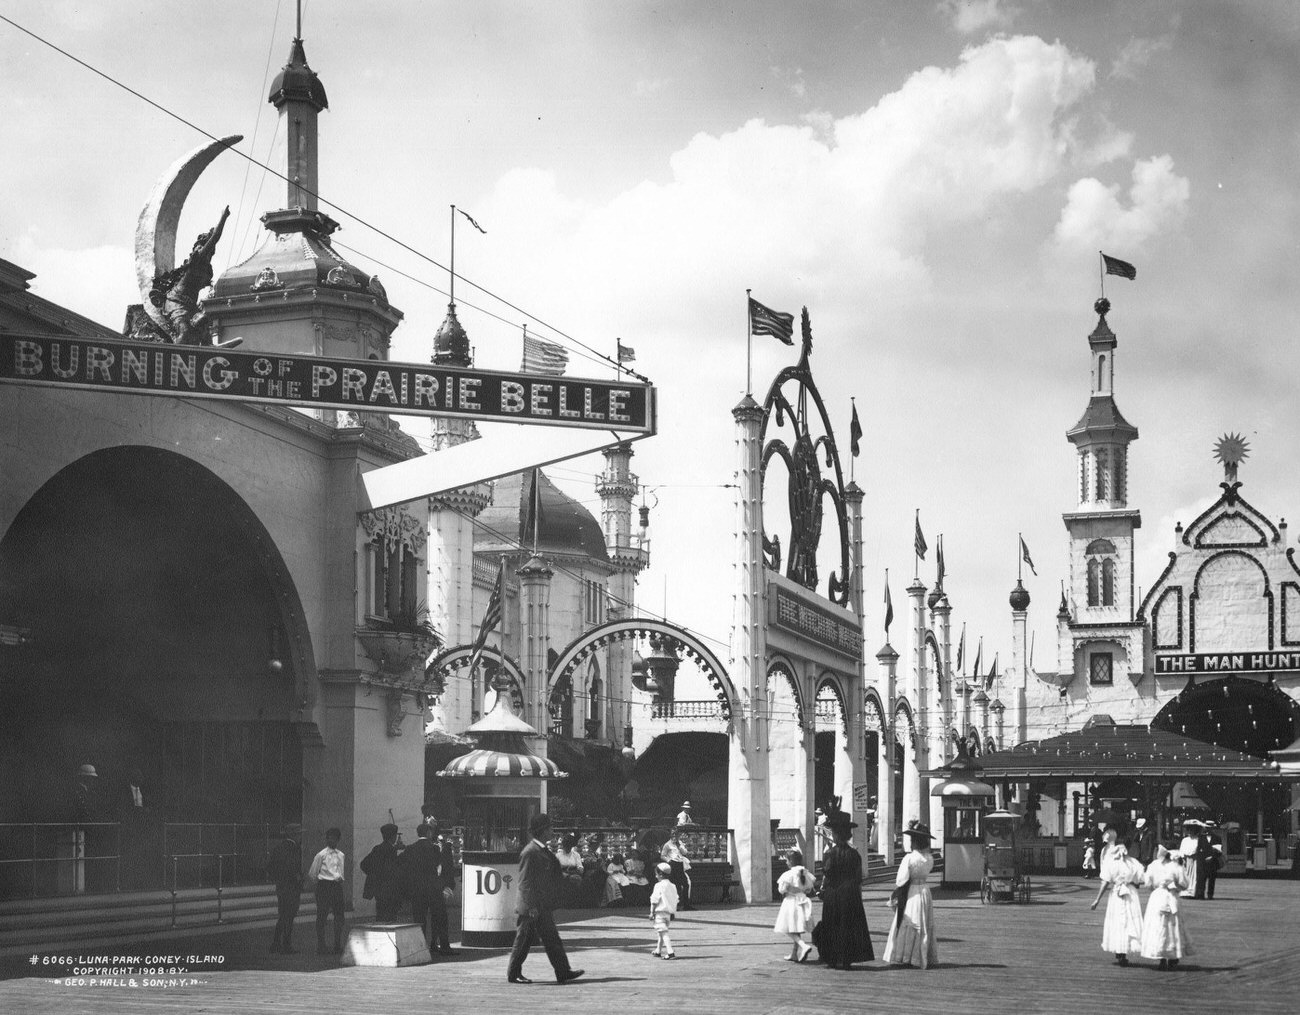 Luna Park With Attractions: Burning Of The Prairie Bell And The Man Hunt, 1908